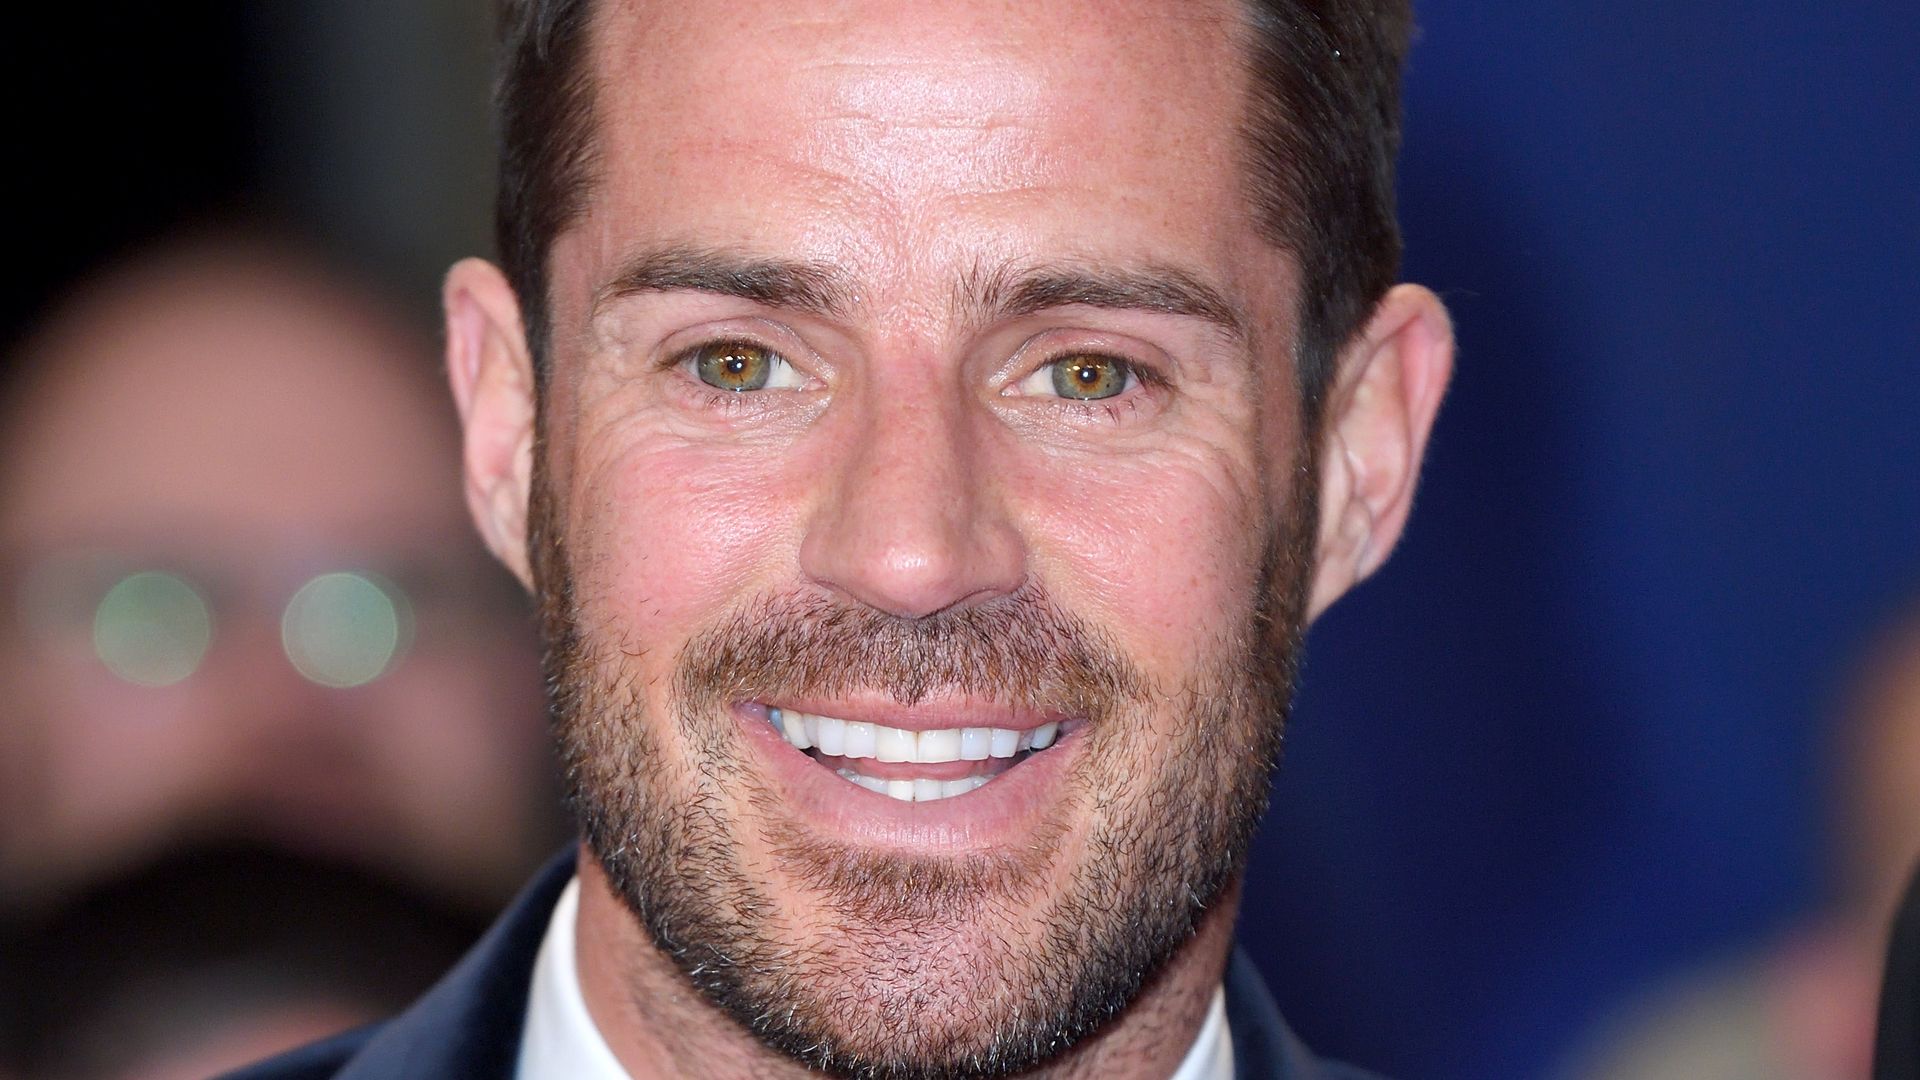 Jamie Redknapp shares adorable photo of son Raphael from family home